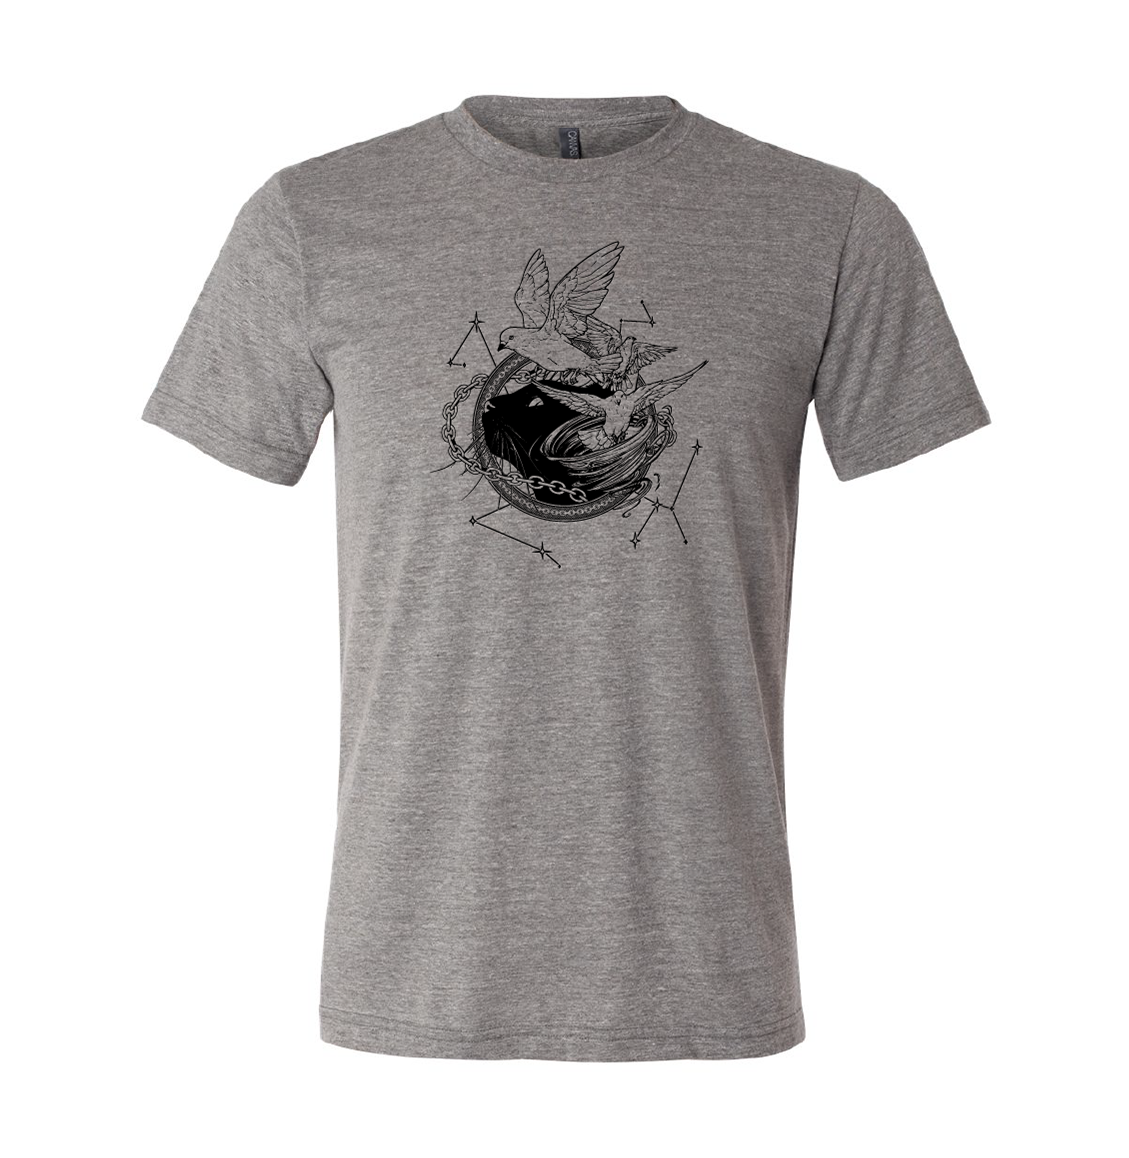 Grey T-shirt with white illustration of Dustspinners, constellations, and chains swirling around Faithful the cat